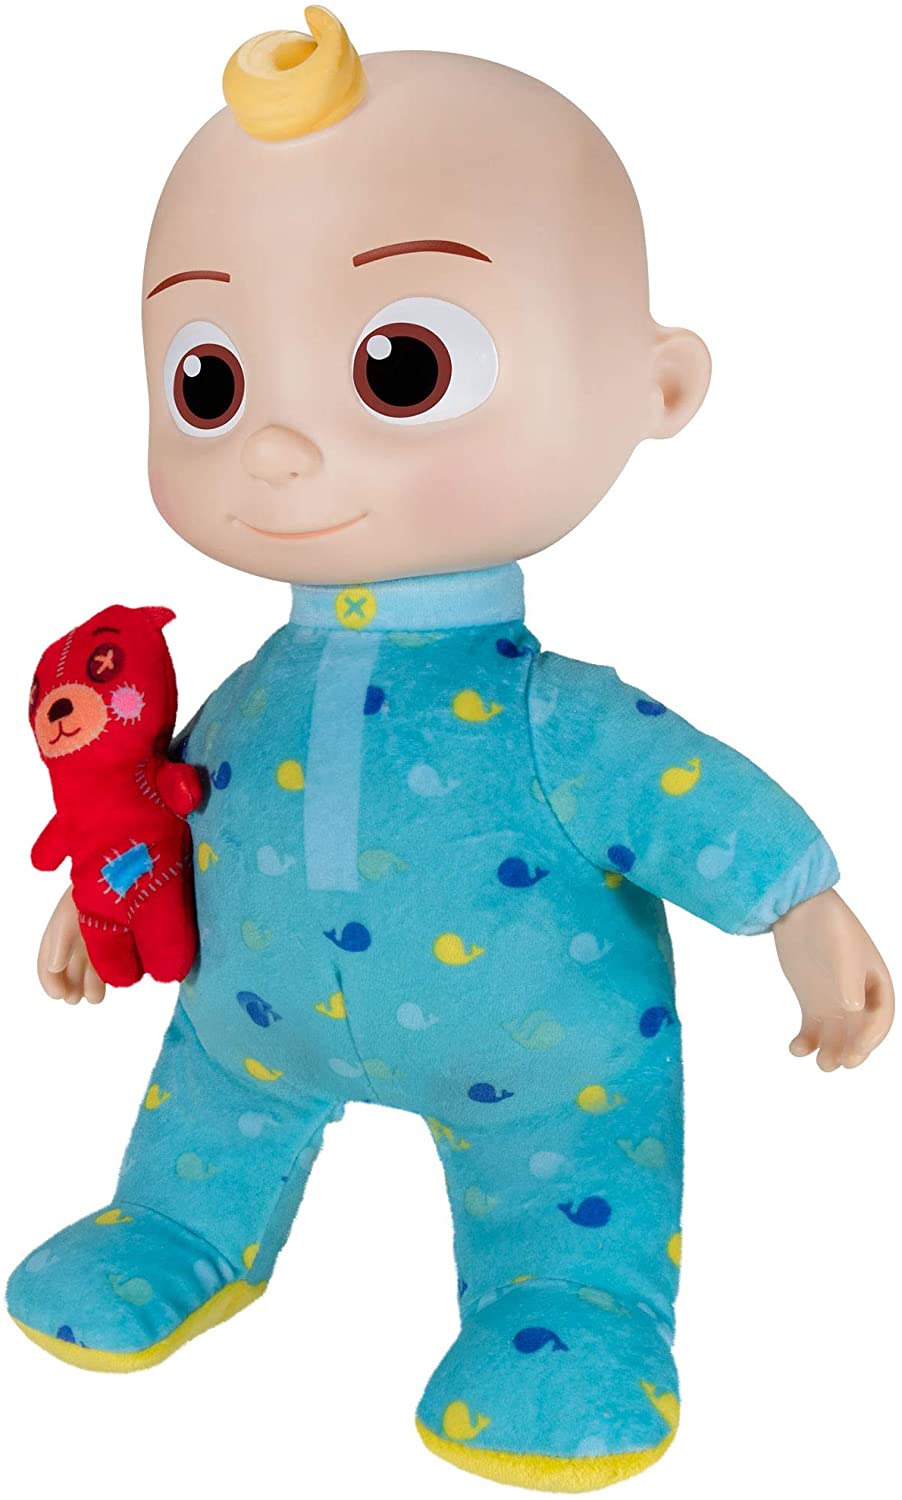 Cocomelon Musical Bedtime JJ Doll - ANB Baby -$20 - $50